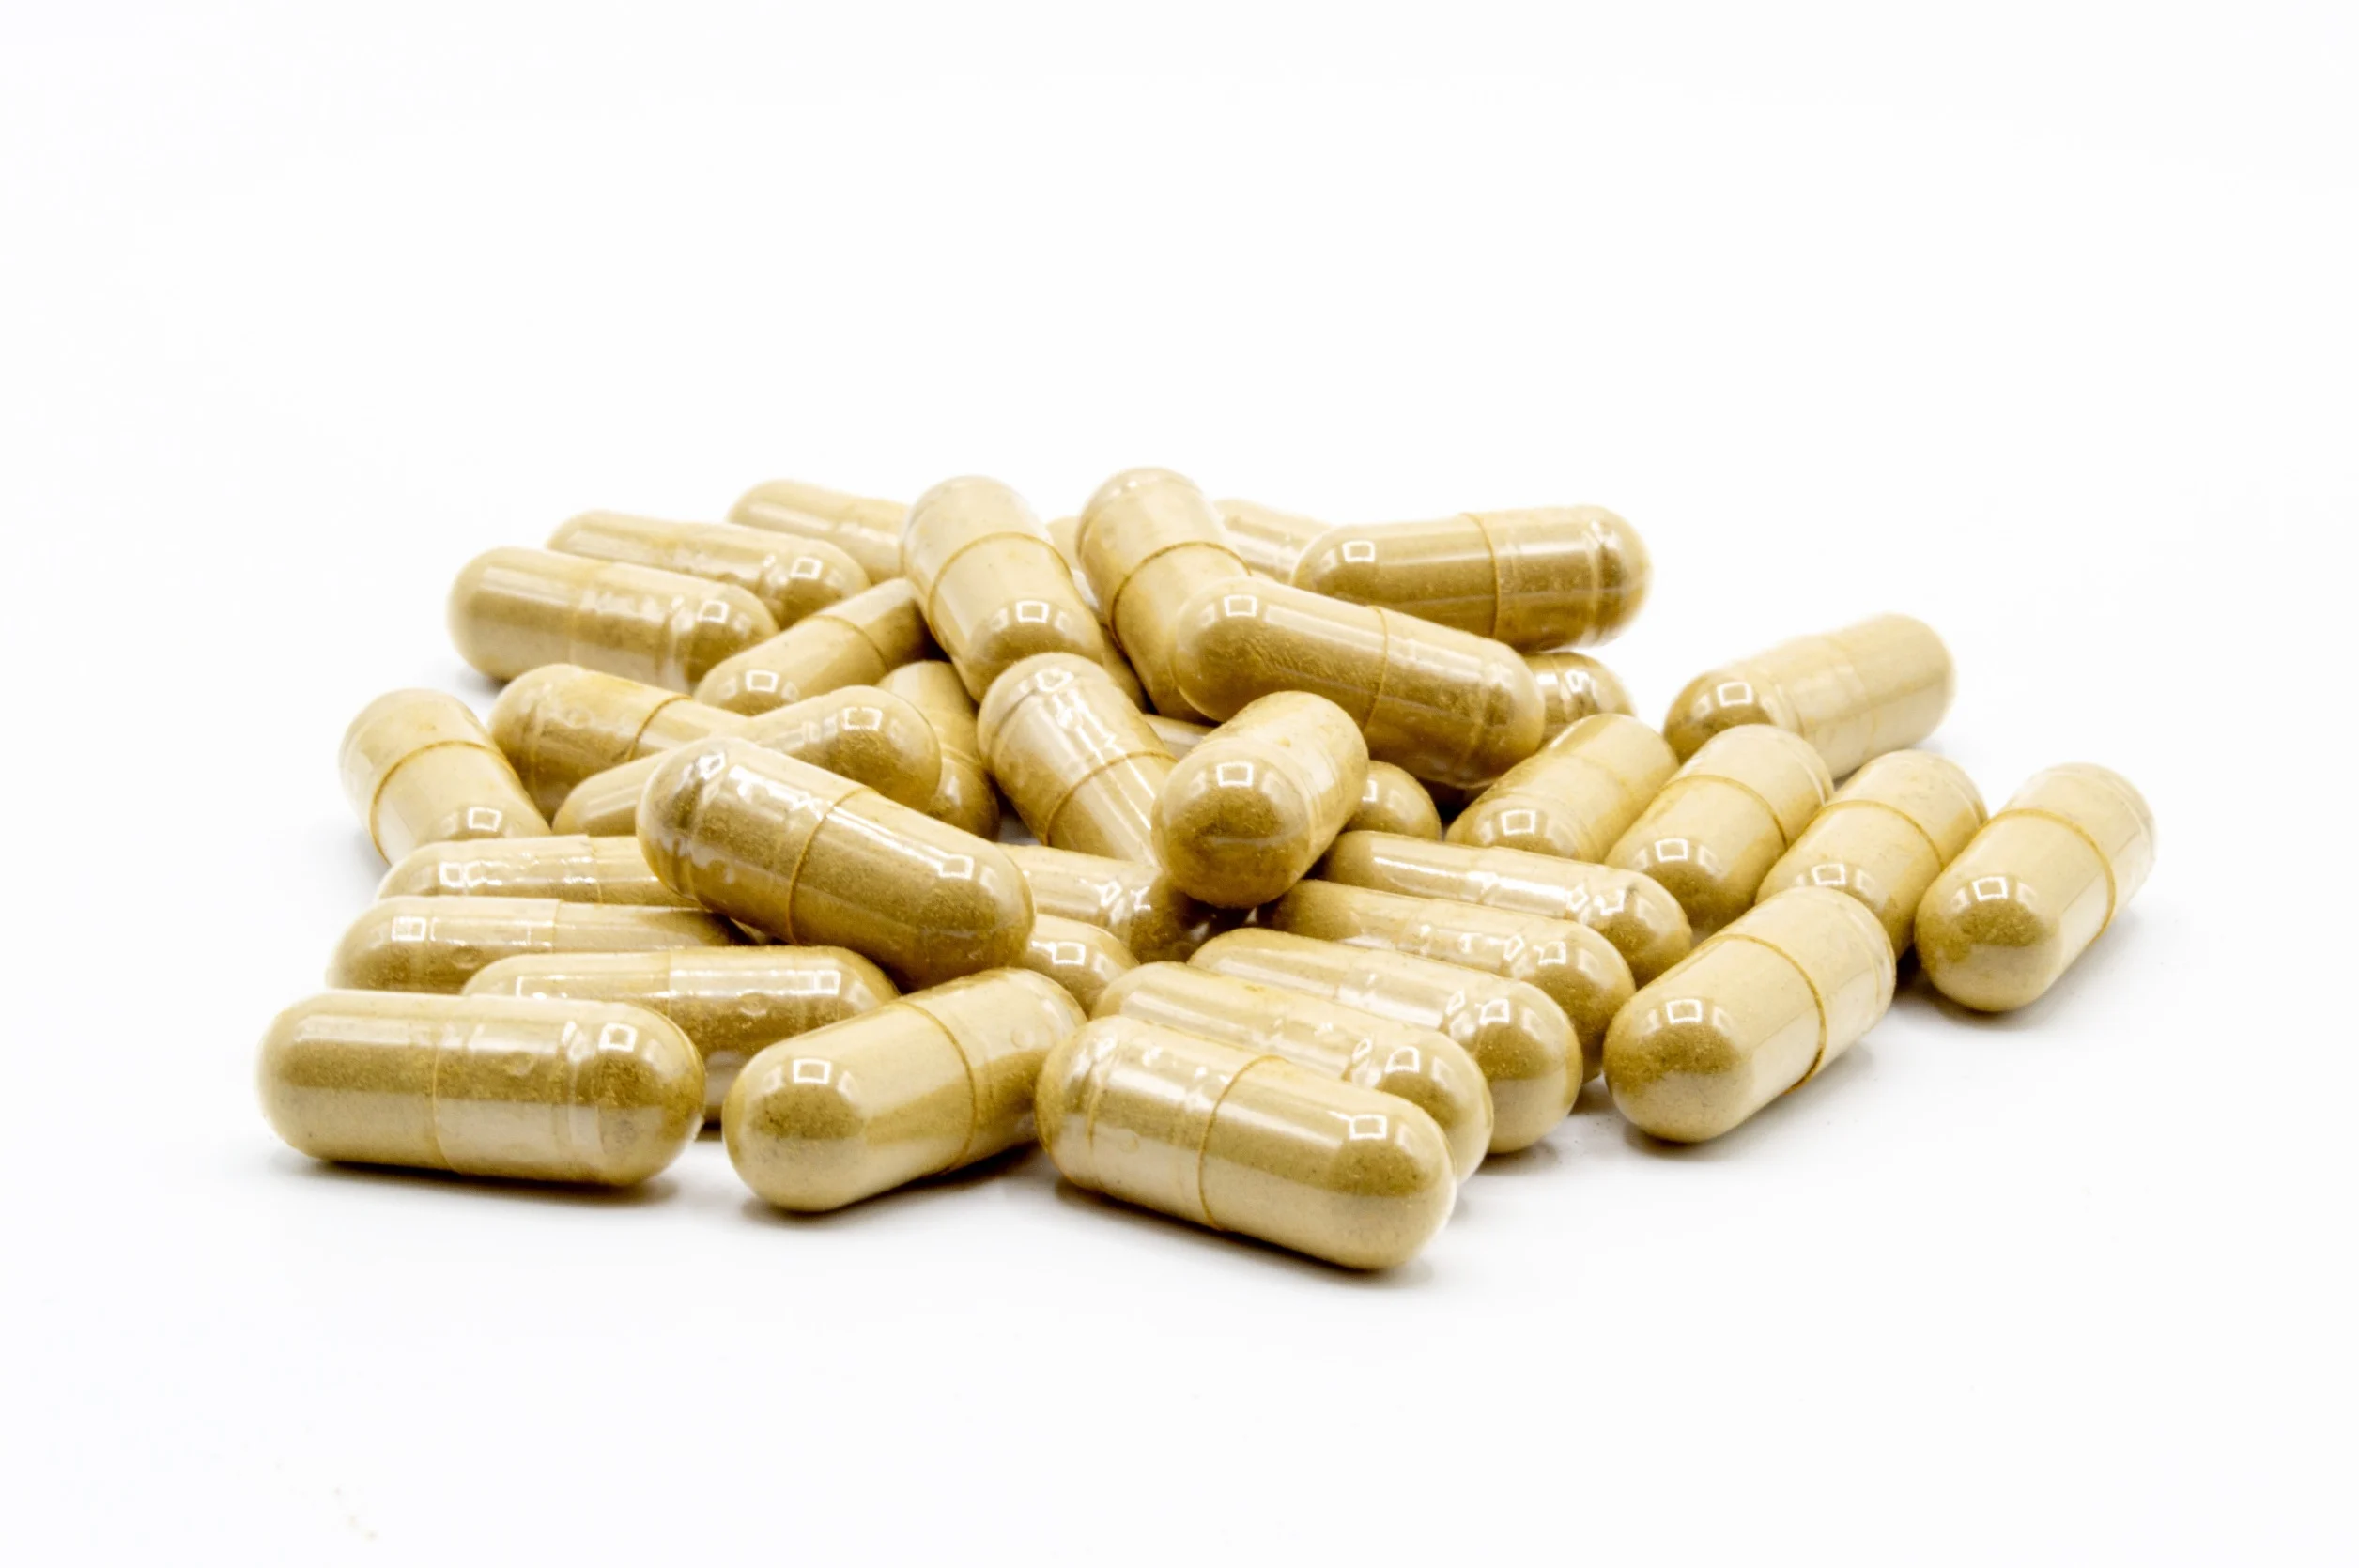 Directions for Using White Borneo Kratom for Best Results